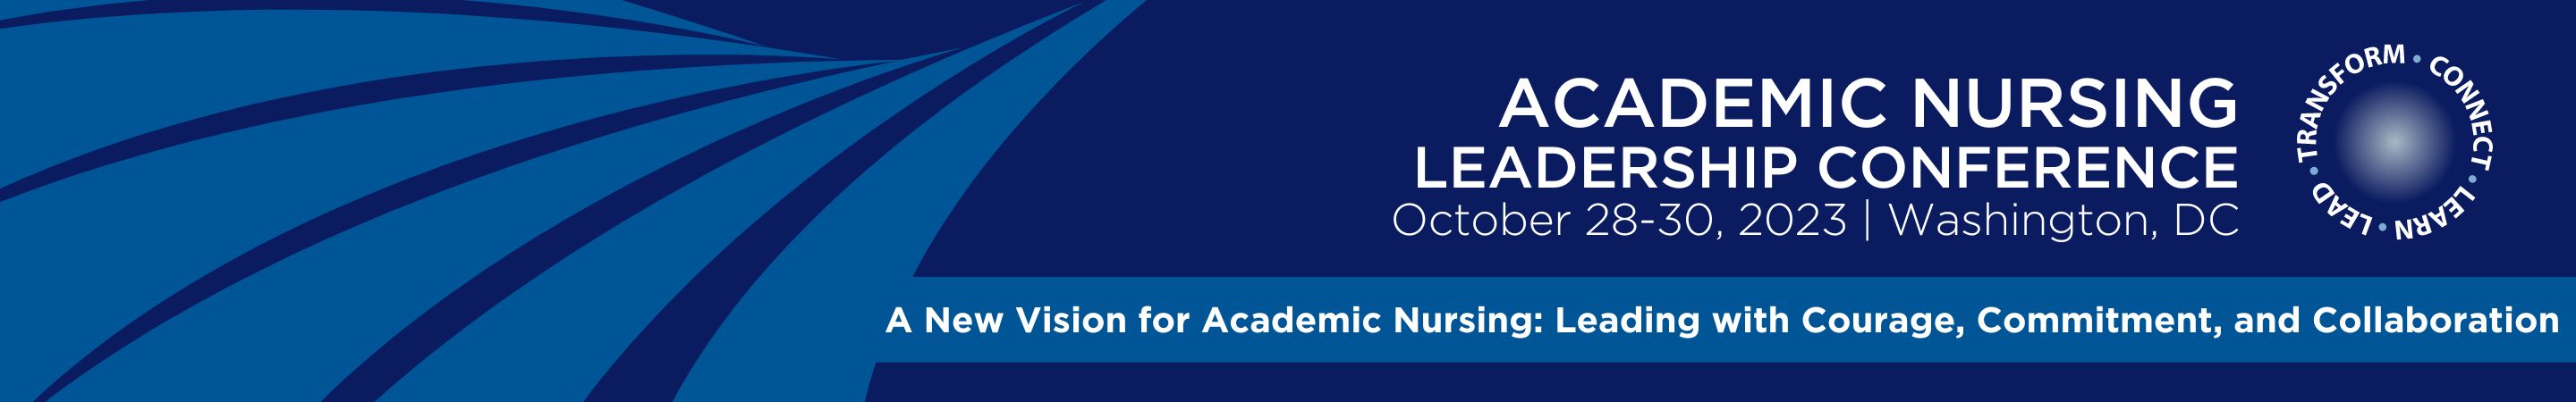 american association of colleges of nursing | The voice of academic nursing | academic nursing leadership conference | Washington, DC | transform. connect. learn. lead